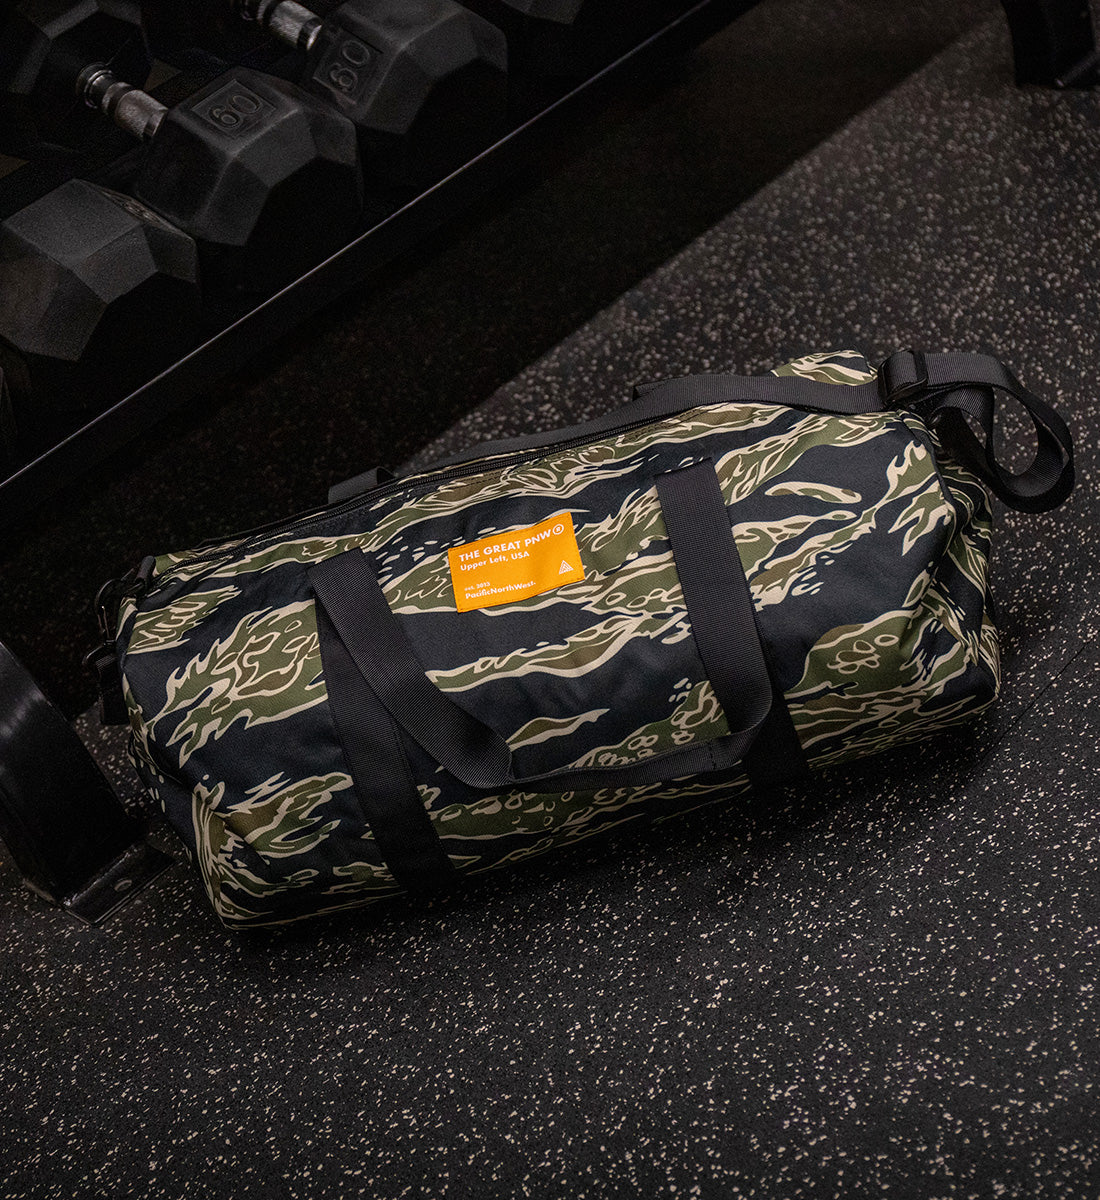 Serial Duffel Bag - Forest Camo - The Great PNW